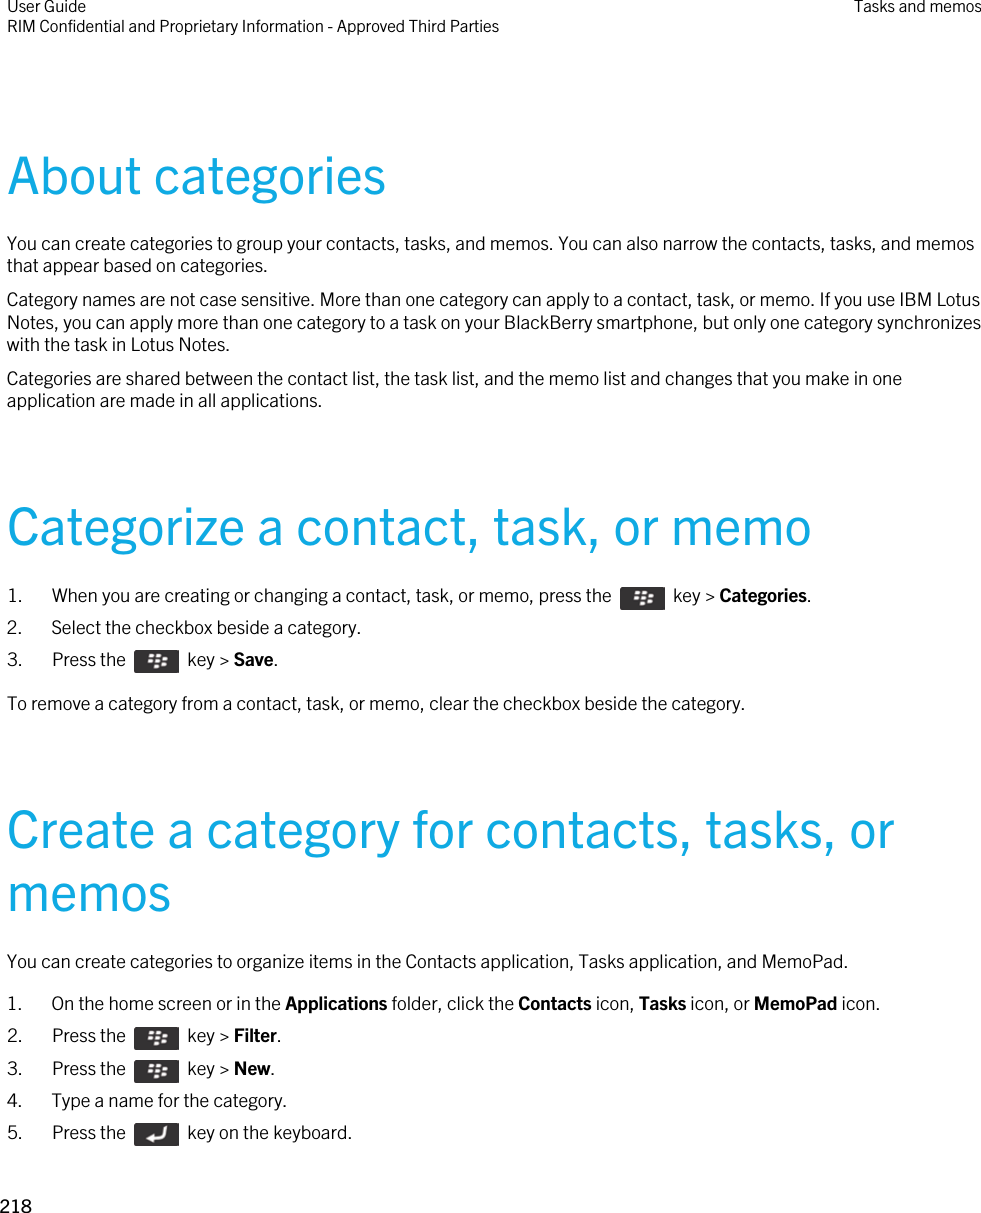 About categoriesYou can create categories to group your contacts, tasks, and memos. You can also narrow the contacts, tasks, and memos that appear based on categories.Category names are not case sensitive. More than one category can apply to a contact, task, or memo. If you use IBM Lotus Notes, you can apply more than one category to a task on your BlackBerry smartphone, but only one category synchronizes with the task in Lotus Notes.Categories are shared between the contact list, the task list, and the memo list and changes that you make in one application are made in all applications.Categorize a contact, task, or memo1.  When you are creating or changing a contact, task, or memo, press the    key &gt; Categories. 2. Select the checkbox beside a category.3.  Press the    key &gt; Save. To remove a category from a contact, task, or memo, clear the checkbox beside the category.Create a category for contacts, tasks, or memosYou can create categories to organize items in the Contacts application, Tasks application, and MemoPad.1. On the home screen or in the Applications folder, click the Contacts icon, Tasks icon, or MemoPad icon.2.  Press the    key &gt; Filter. 3.  Press the    key &gt; New. 4. Type a name for the category.5.  Press the    key on the keyboard. User GuideRIM Confidential and Proprietary Information - Approved Third Parties Tasks and memos218 